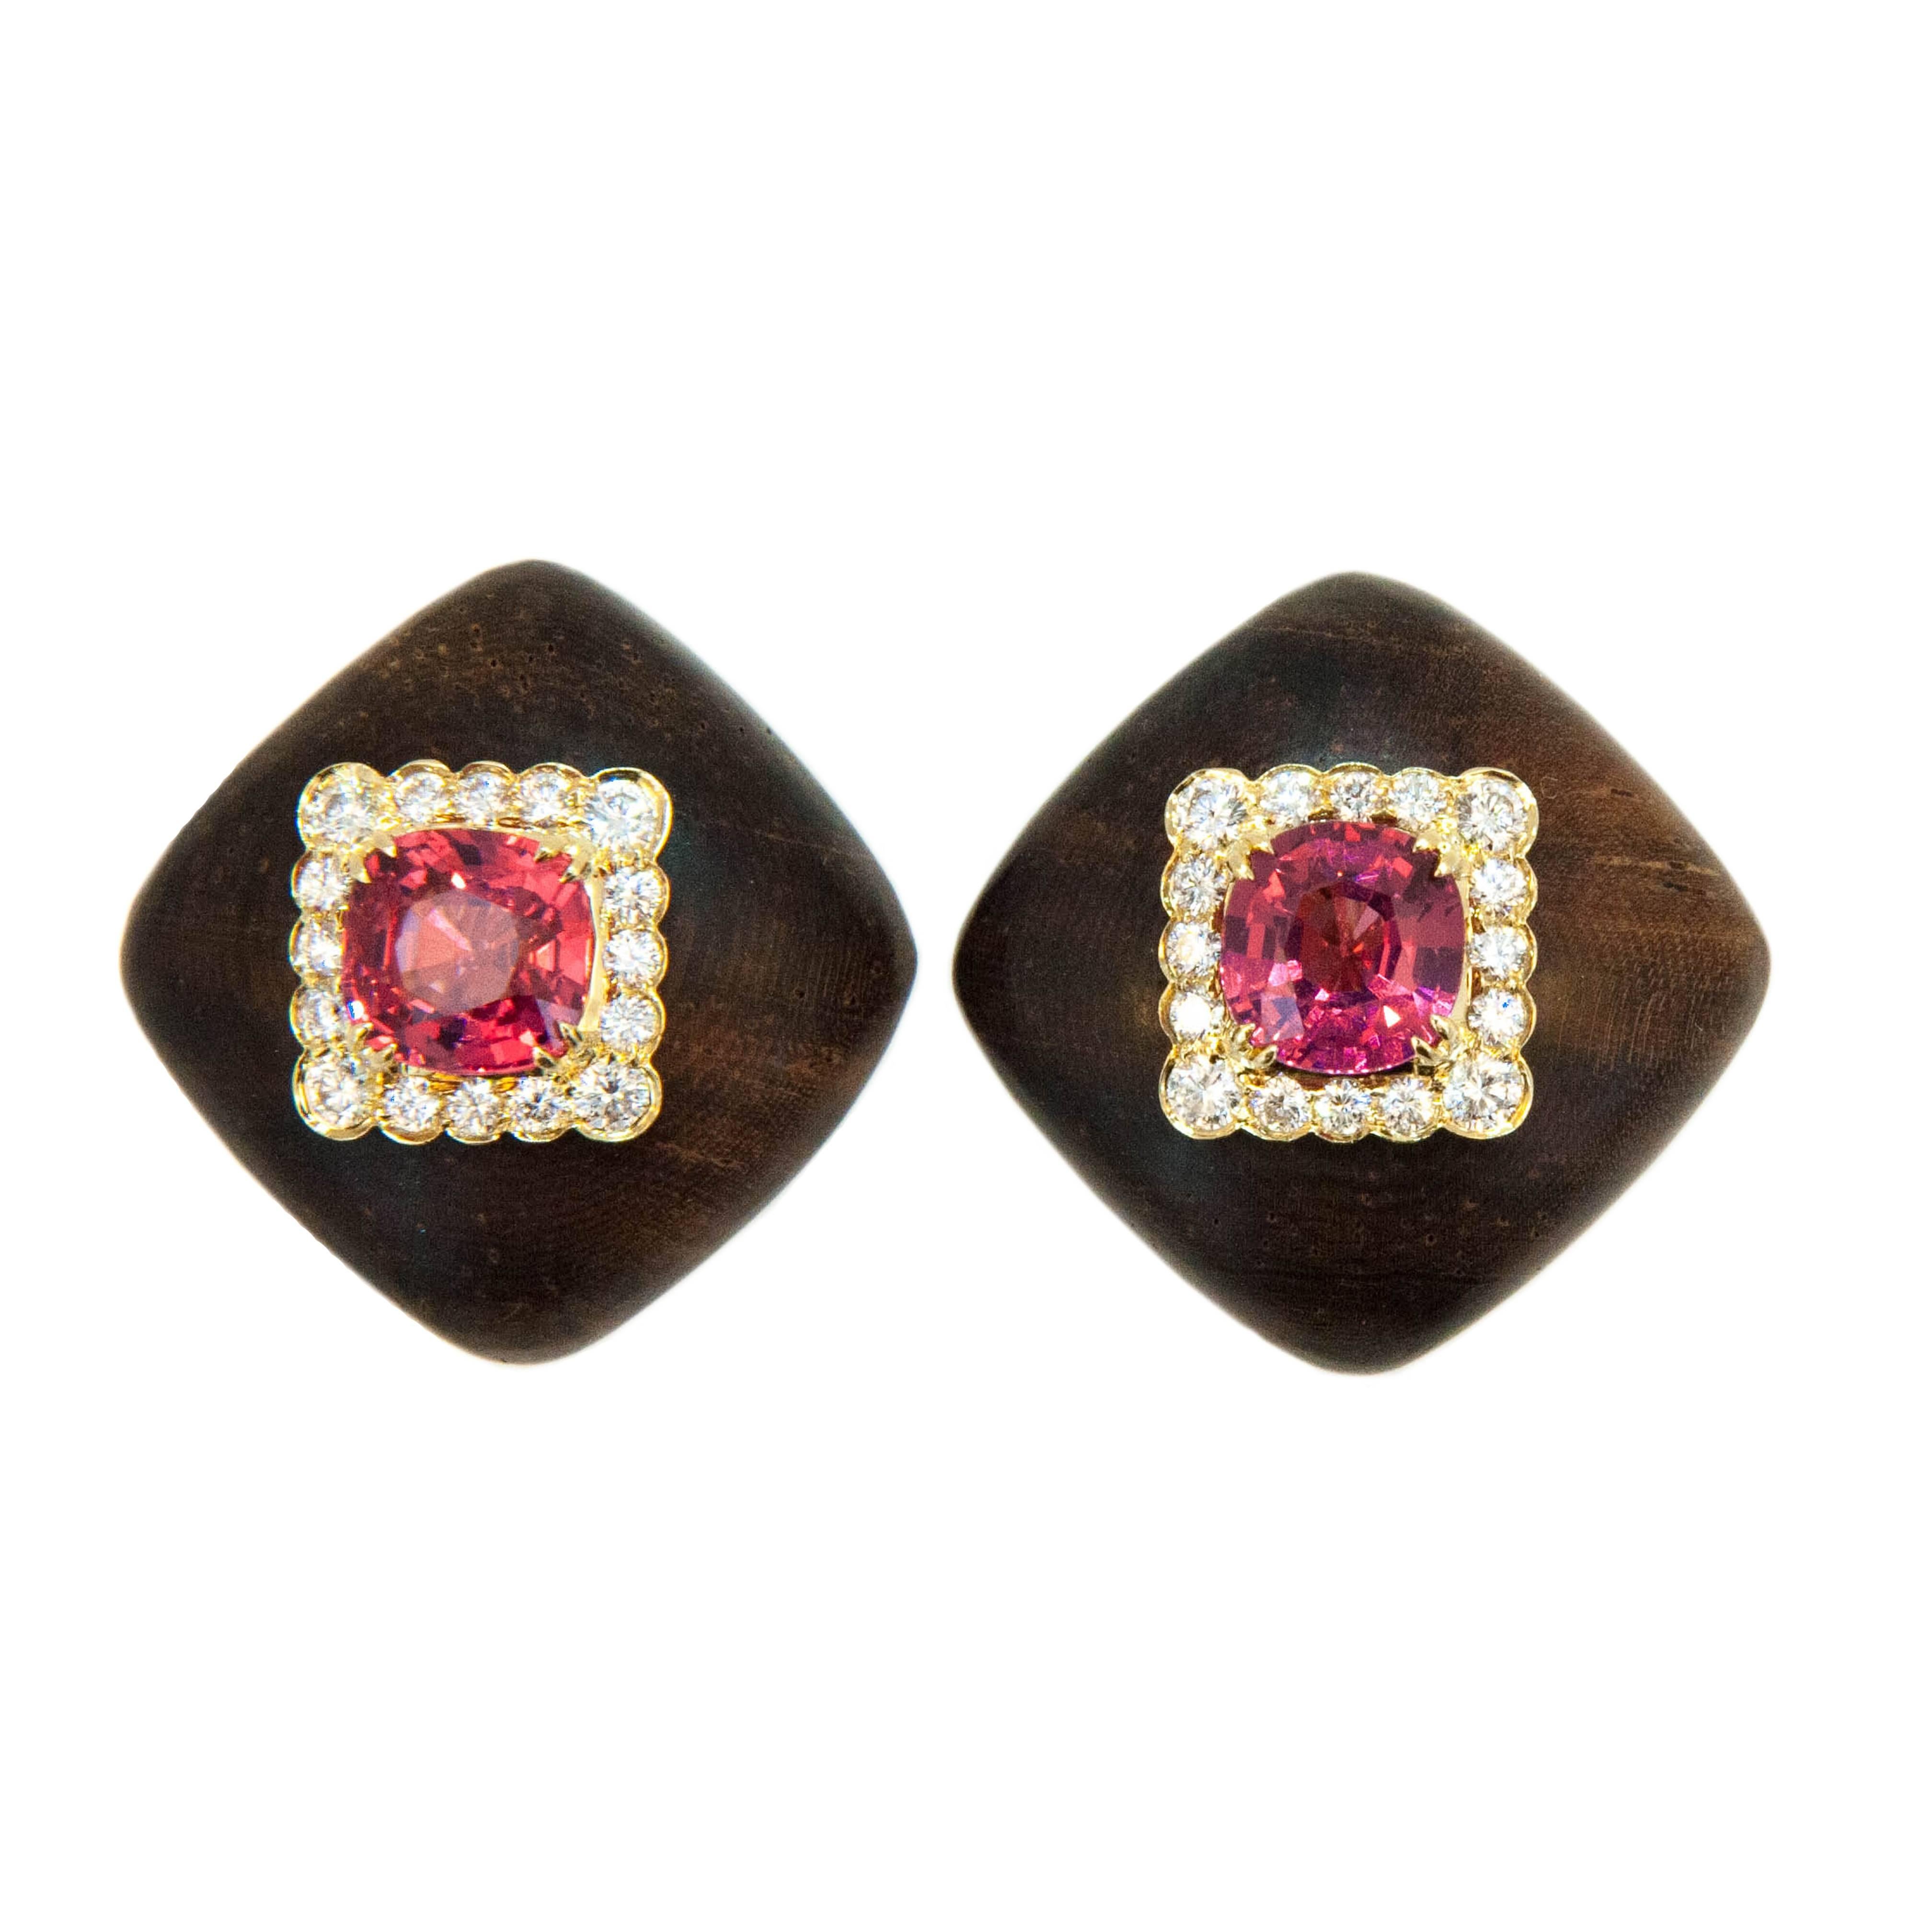 Laura Munder Pink Spinel Diamond and Wood Yellow Gold Earrings